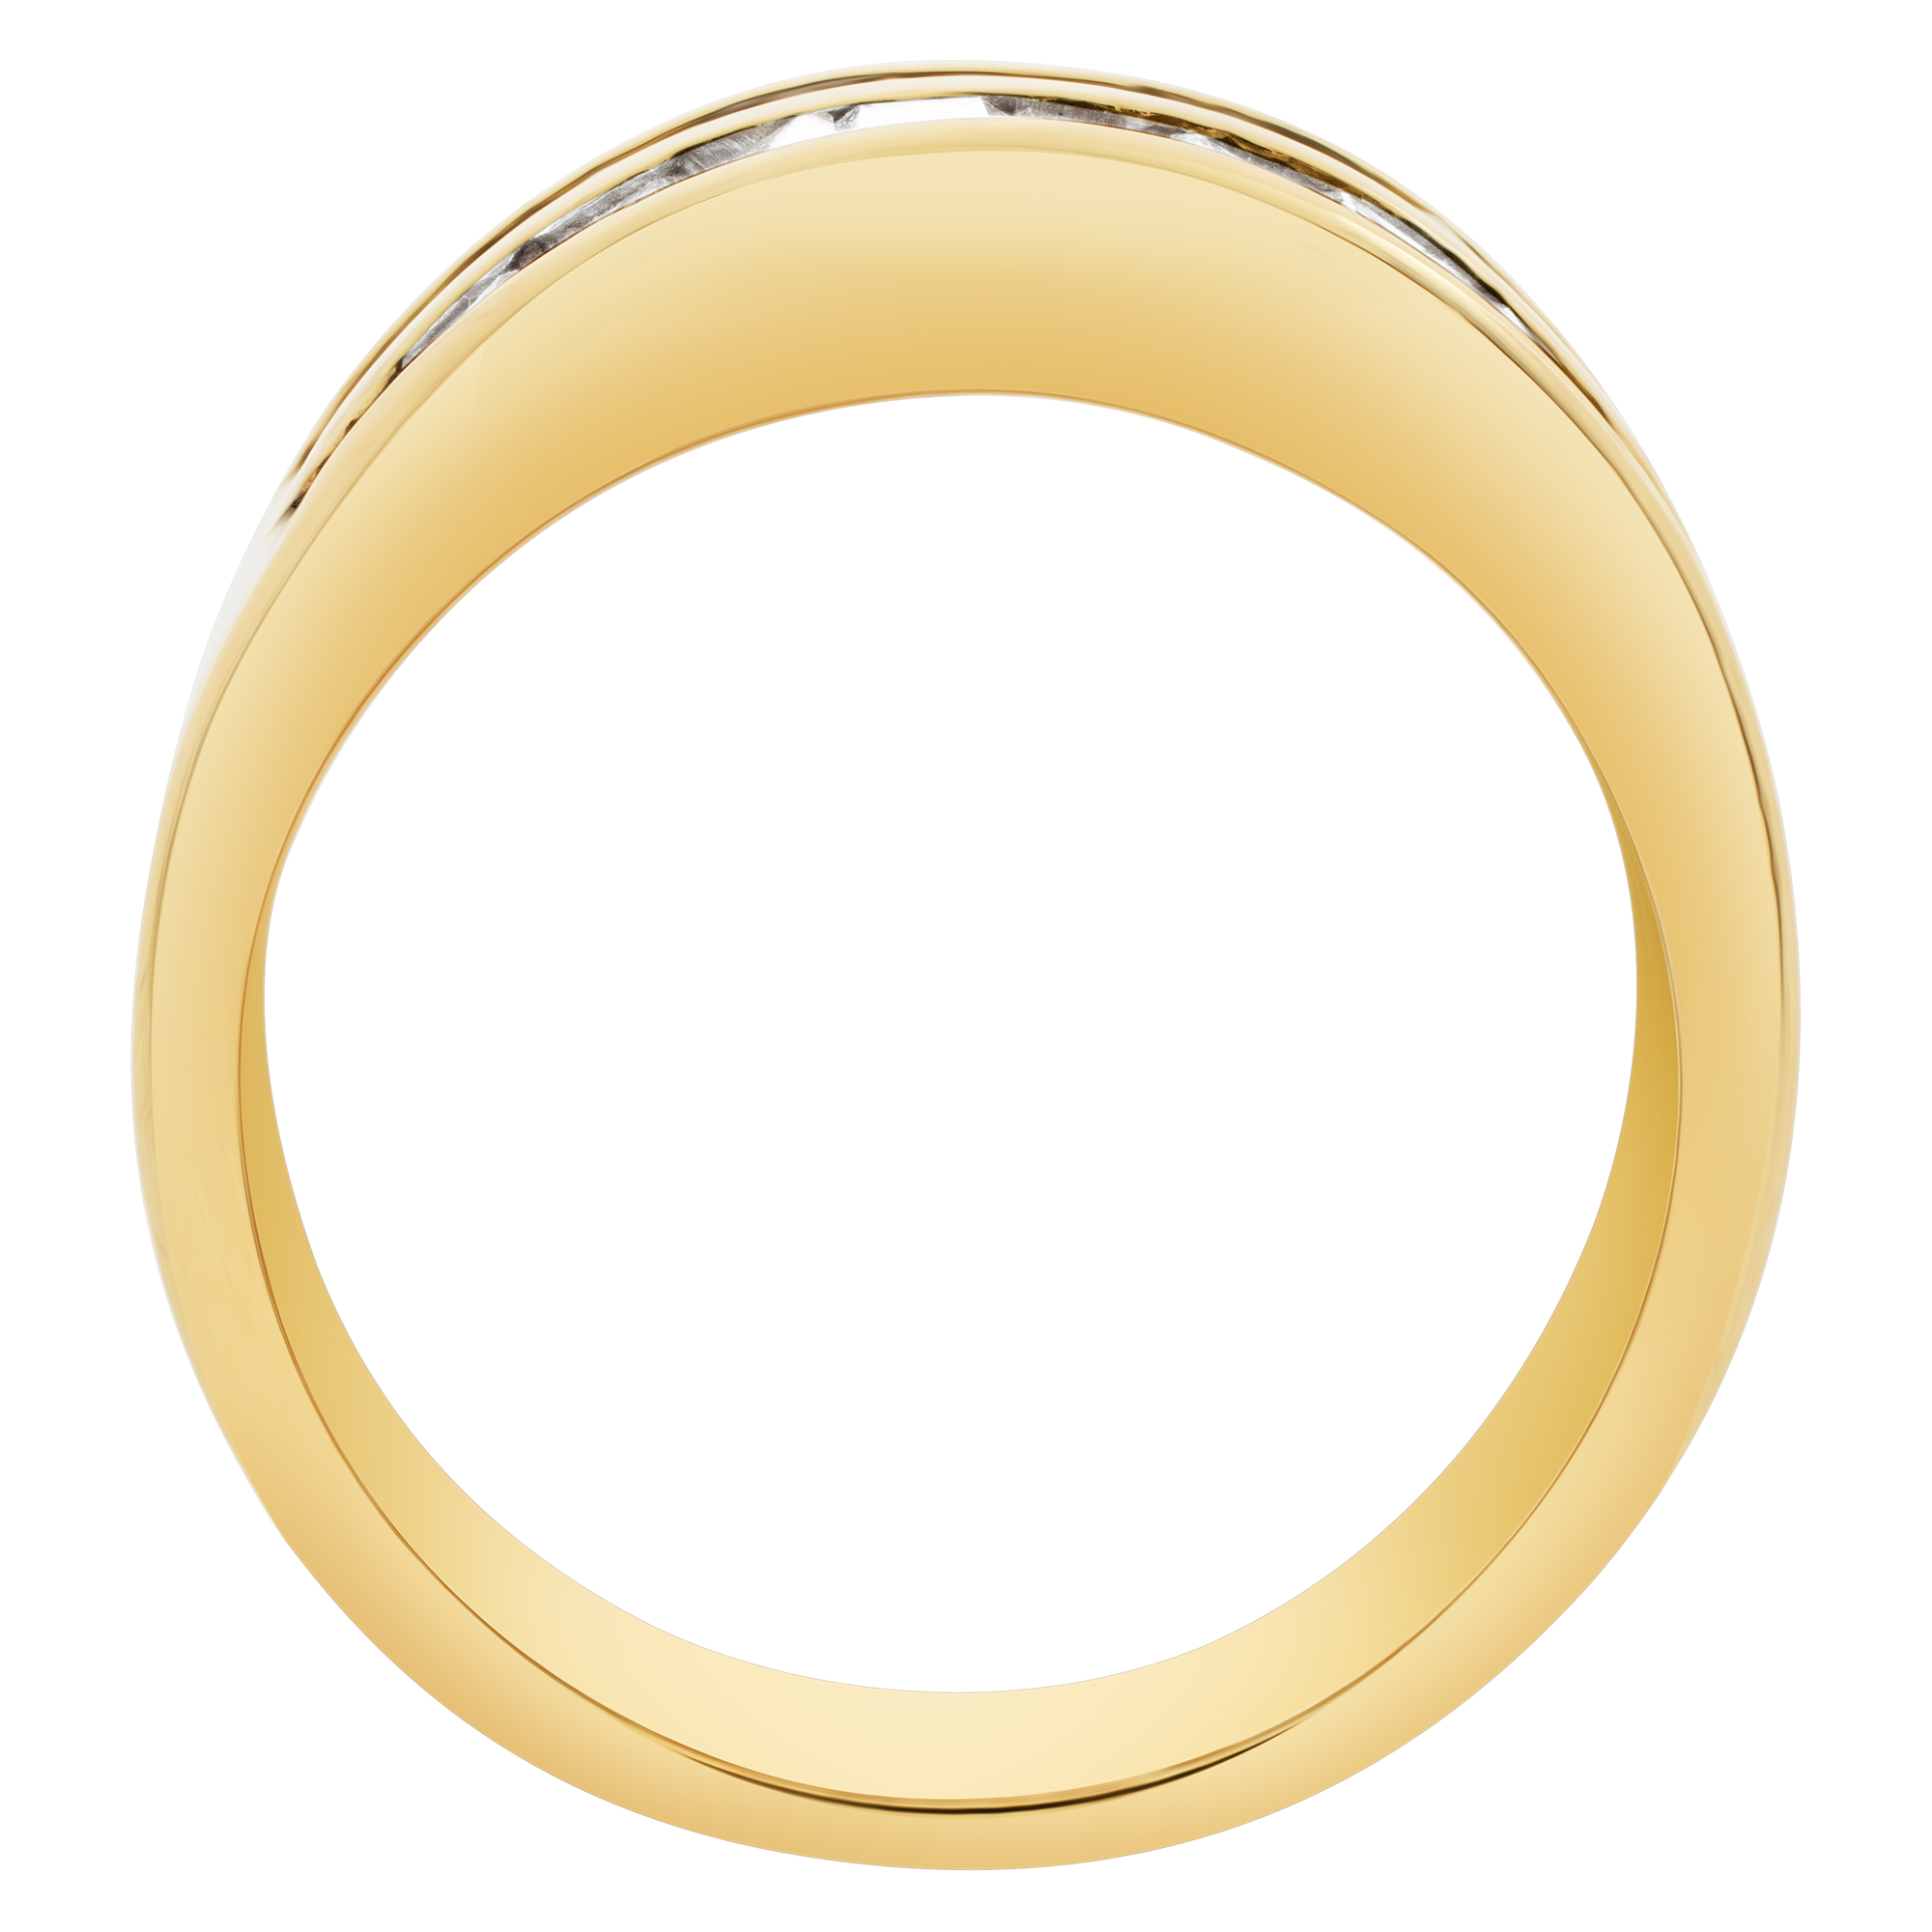 Diamond ring in 14k yellow gold with 2 rows of baguette diamonds image 4